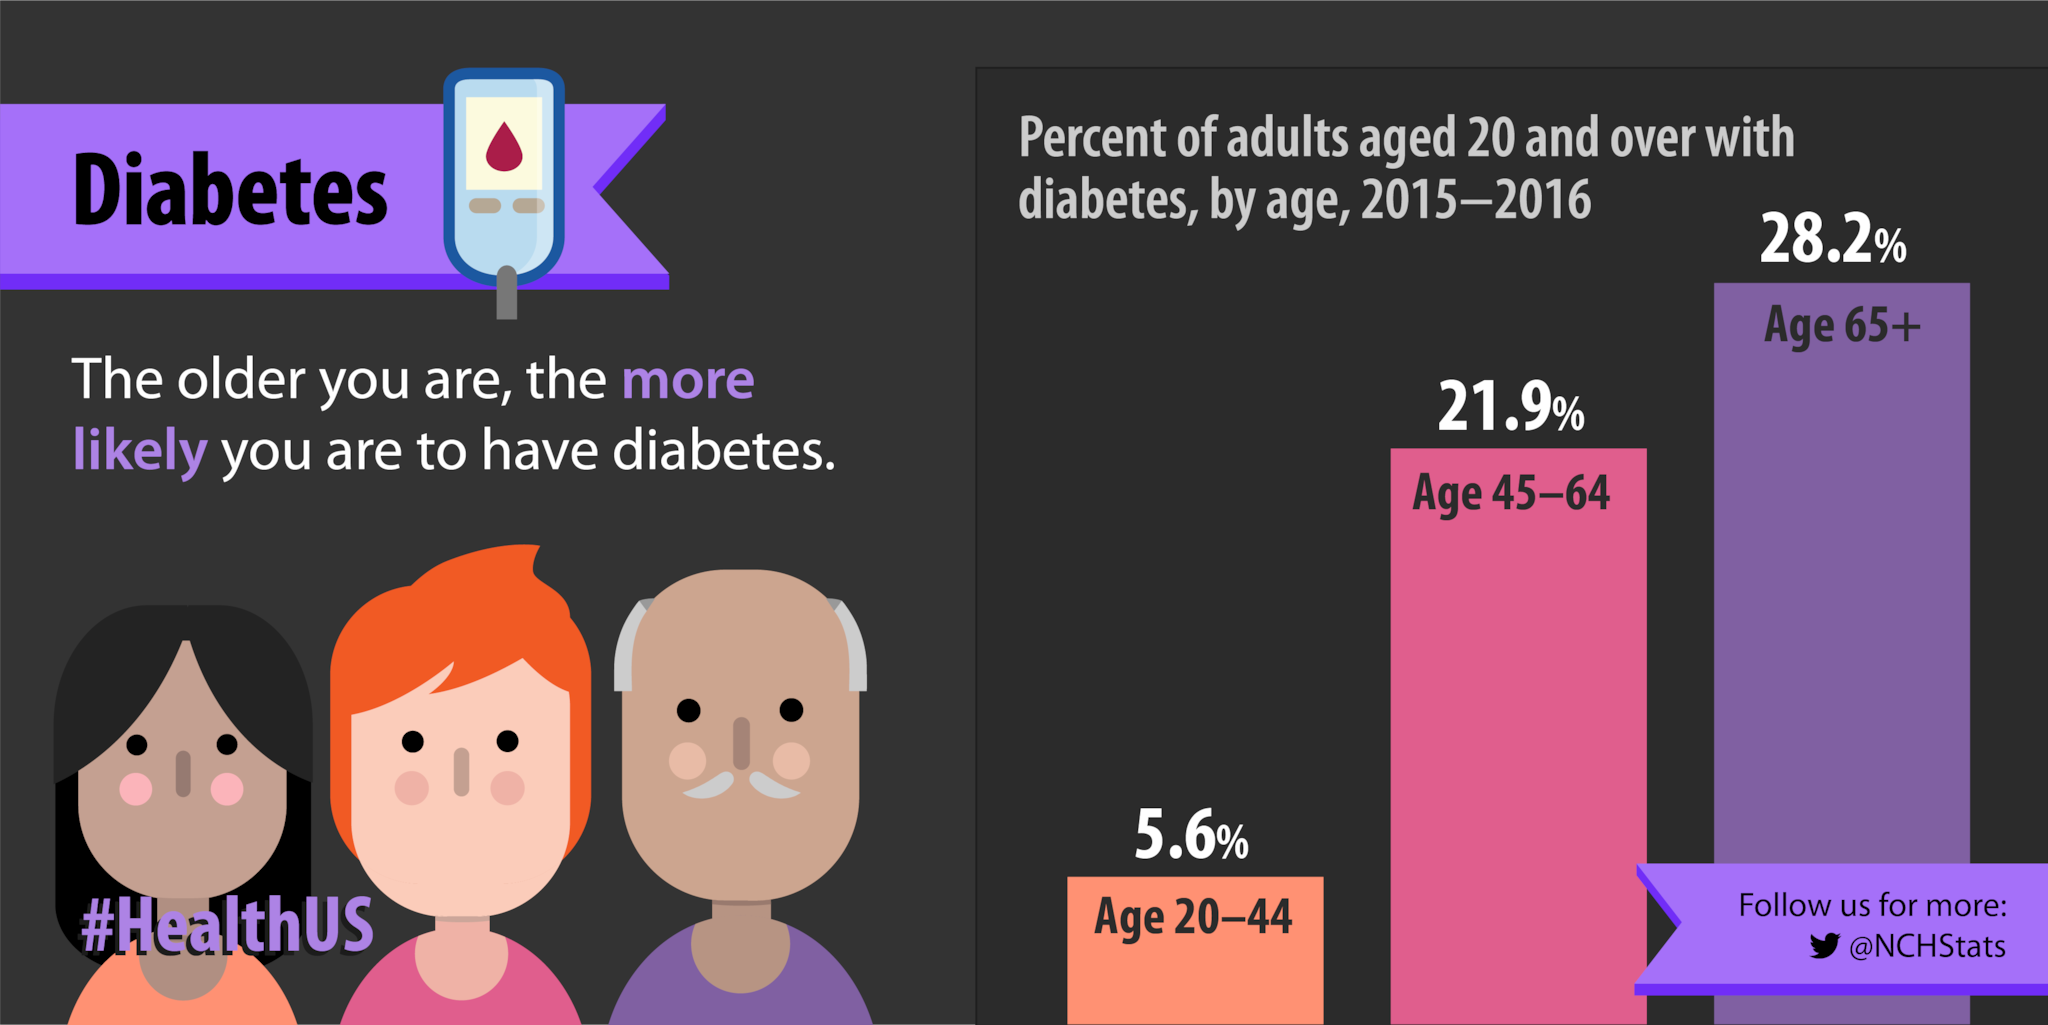 The older you are, the more likely you are to have diabetes.